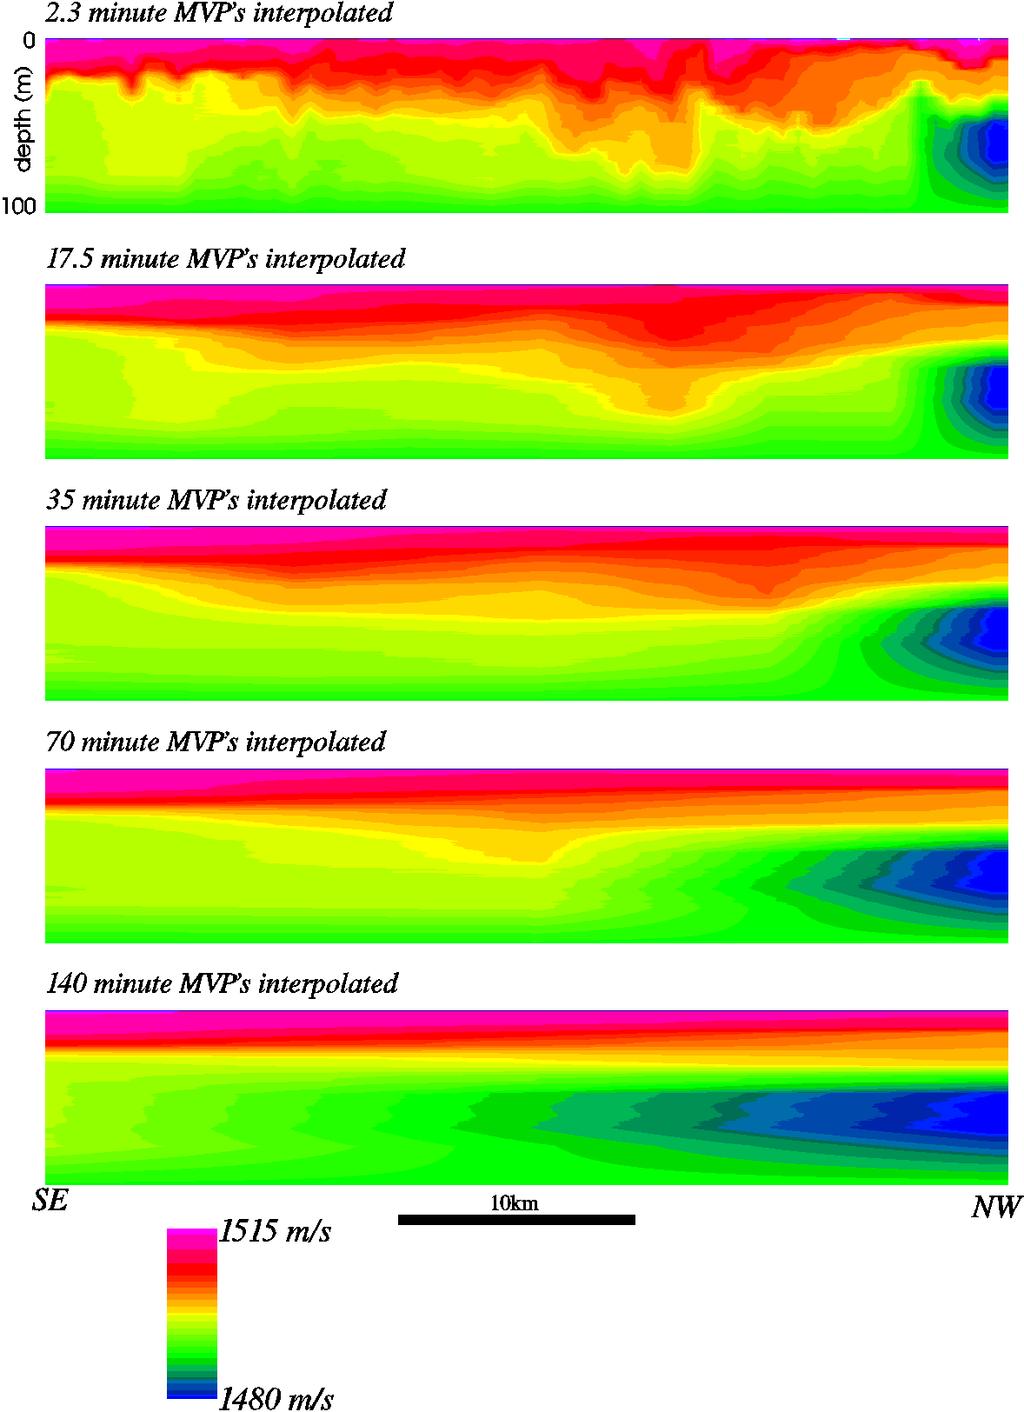 Figure 2: Showing the various spatial models of the water column produced by linear interpolation of the more sparsely sampled profiles. Top shows the results of using the full 2.